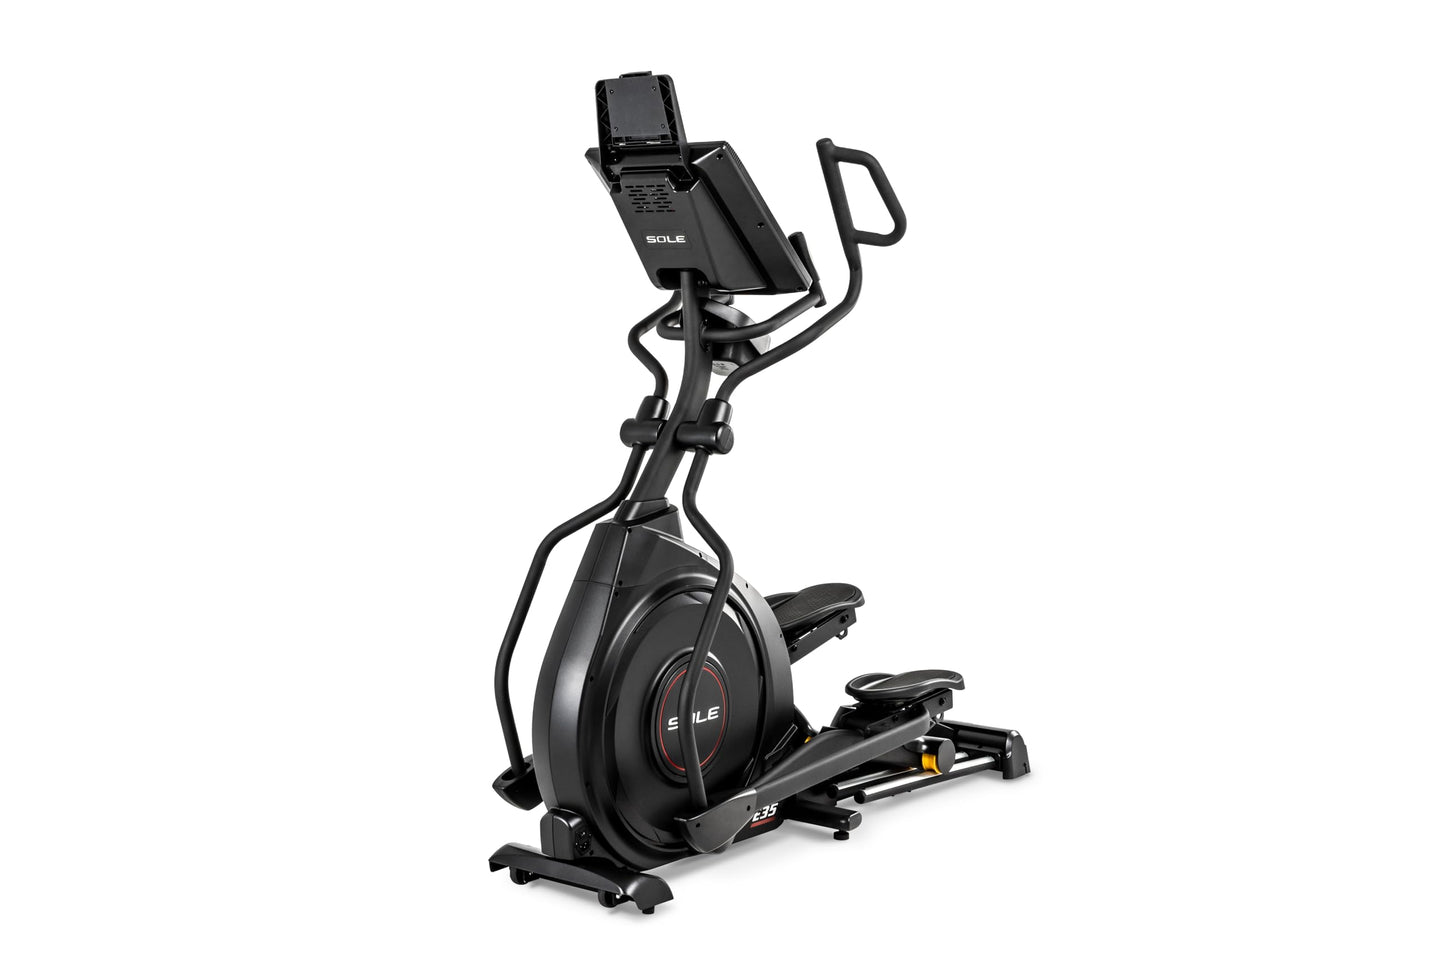 Elliptical Machine: 2023 E35 Elliptical Gym Equipment for Home and Studio, Exercise Equipment with 10" Touchscreen, WiFi, Adjustable Resistance & Pedals, Power Incline and Heart Rate Monitoring (E35)